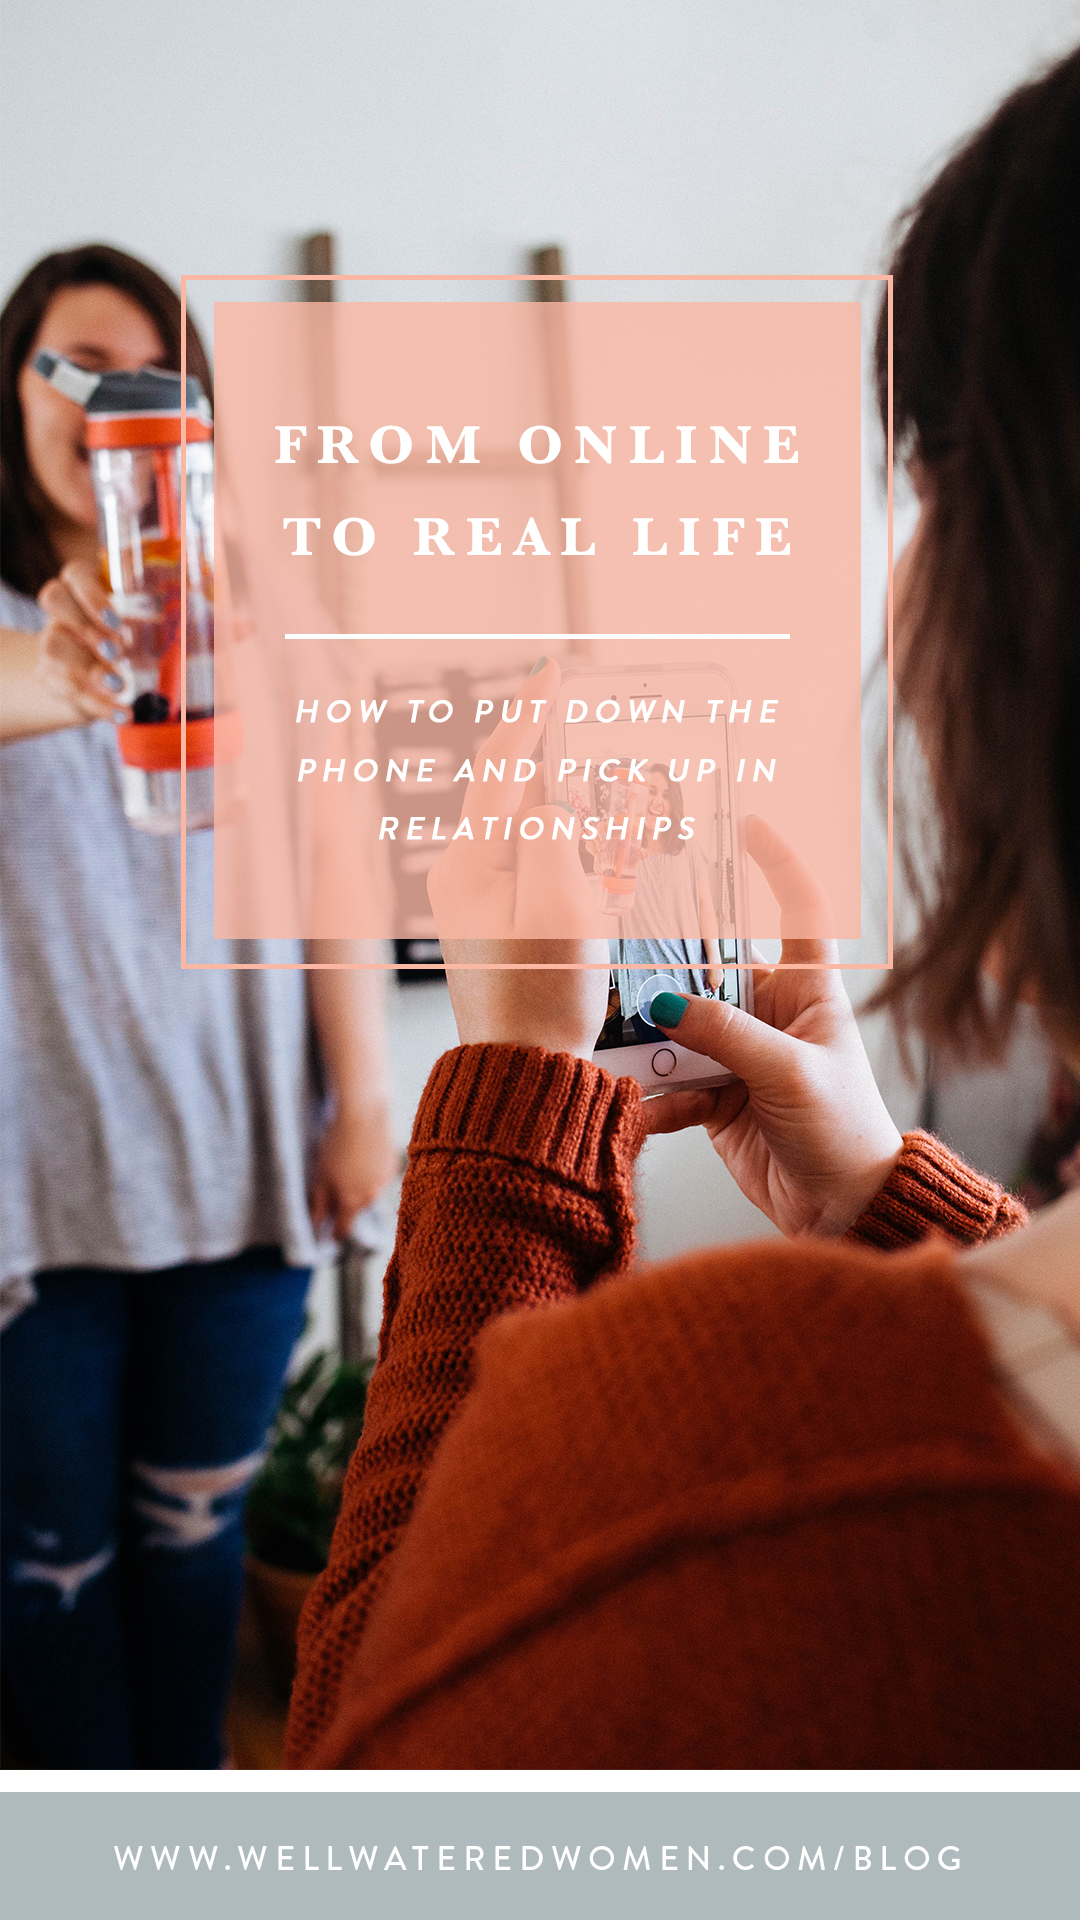 From online to real life: How to put away the phoen and reconnect with the people around you!